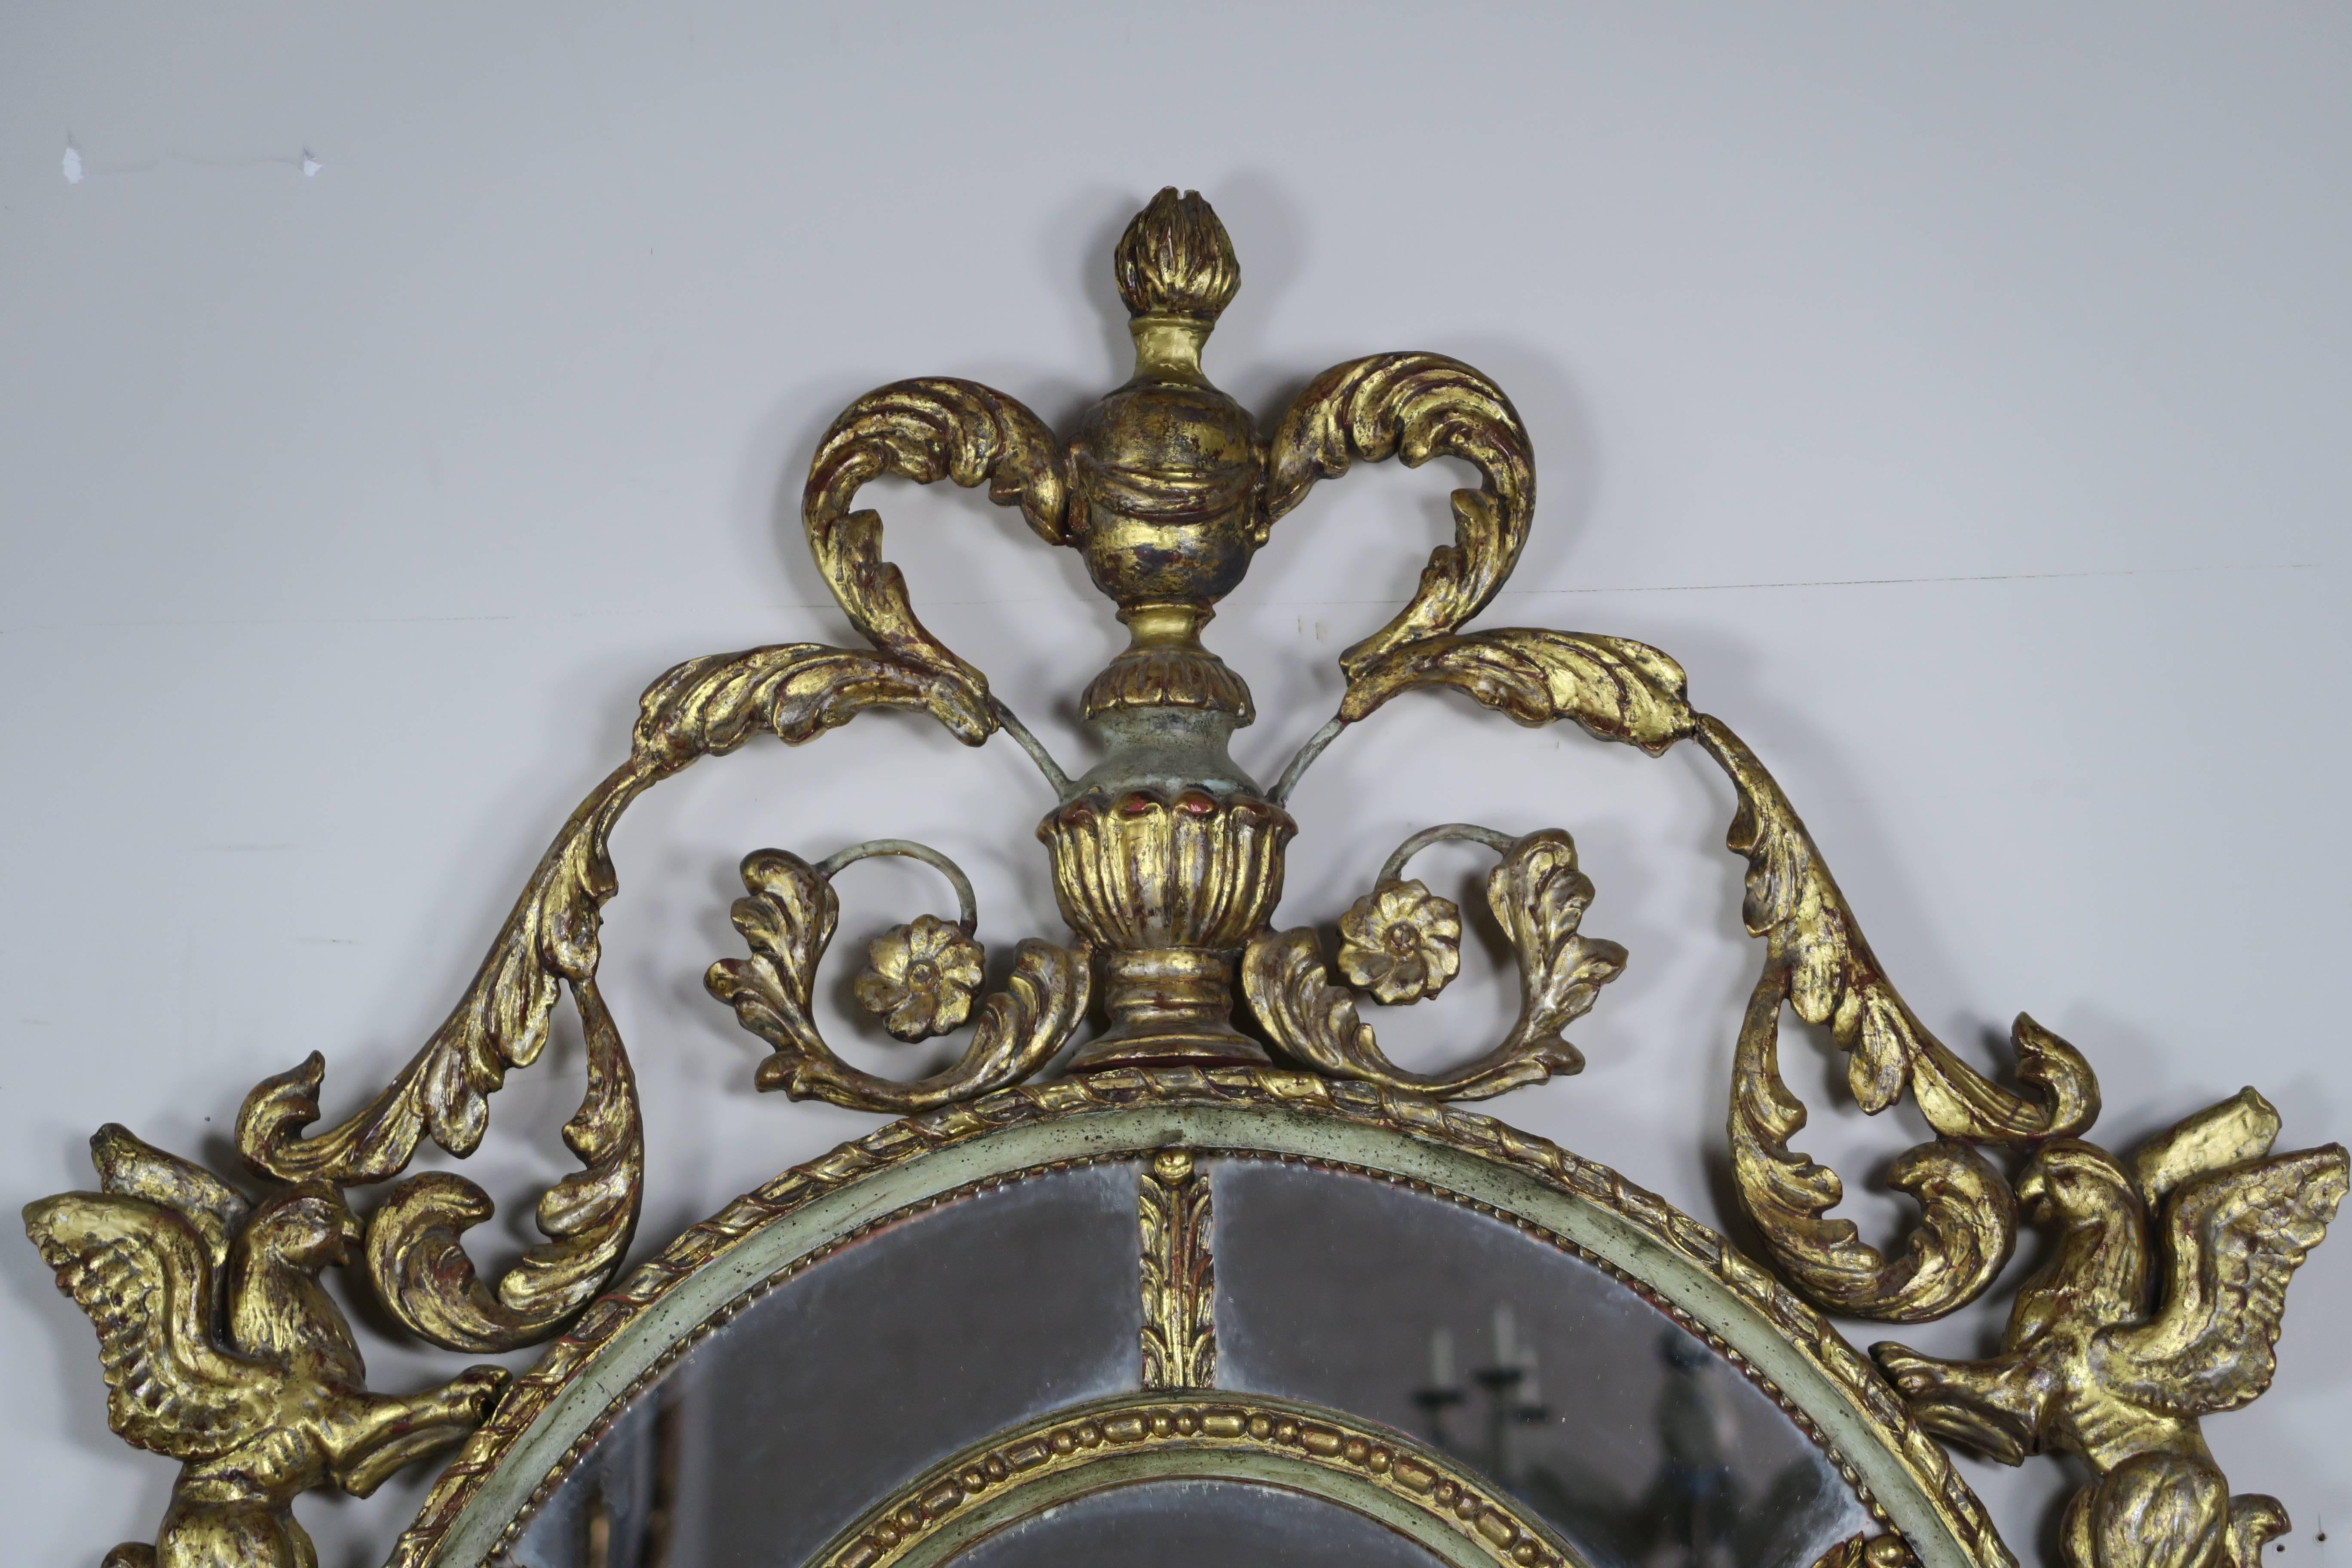 Pair of French Rococo style celadon painted and gold leaf mirrors in an oval shape with giltwood swirling acanthus leaves and flowers throughout. Griffins flank both sides of the mirrors.